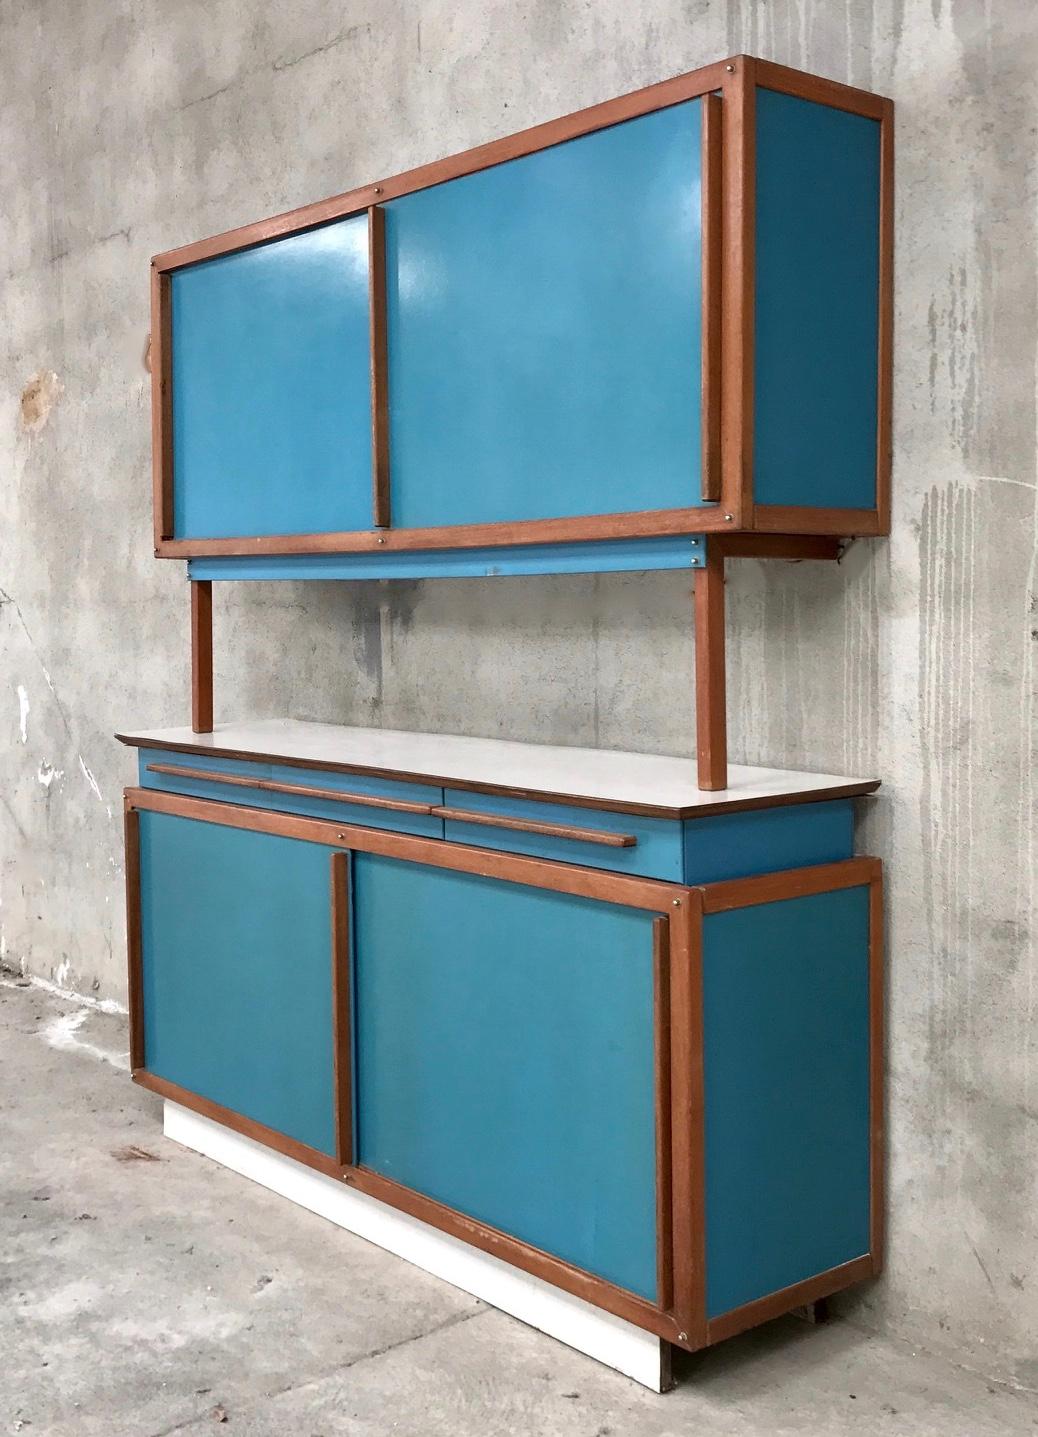 Dresser buffet André Sornay, 1950s
very beautiful original condition, original blue paint.
Structure mahogany sipo screws brass typical of this production. Furniture with a Japanese and cubist spirit, in the same spirit as the creations of